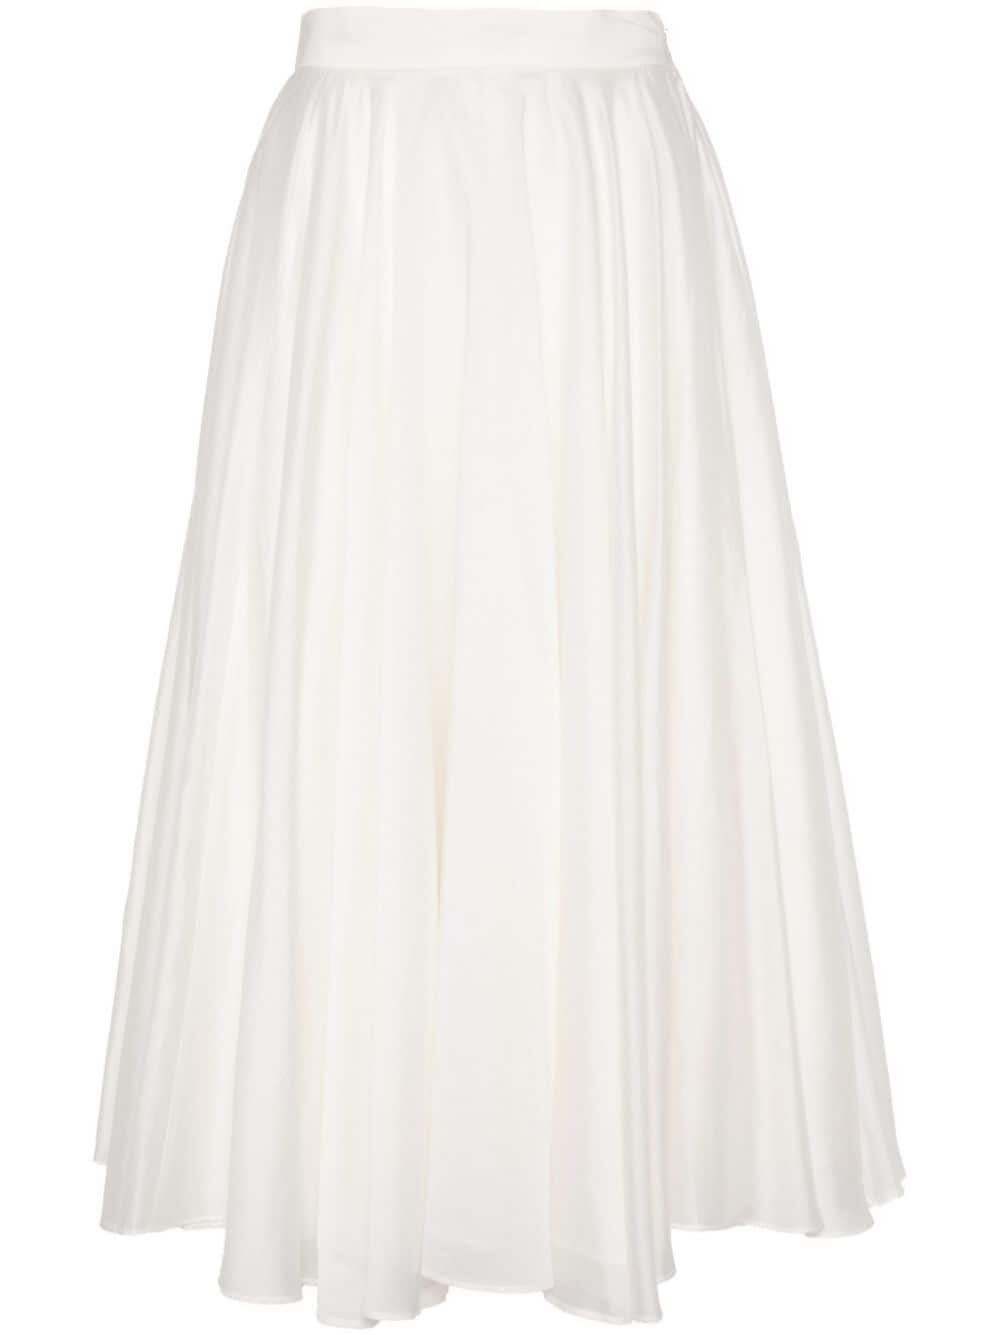 Drhope Midi Skirt With Pleats In White